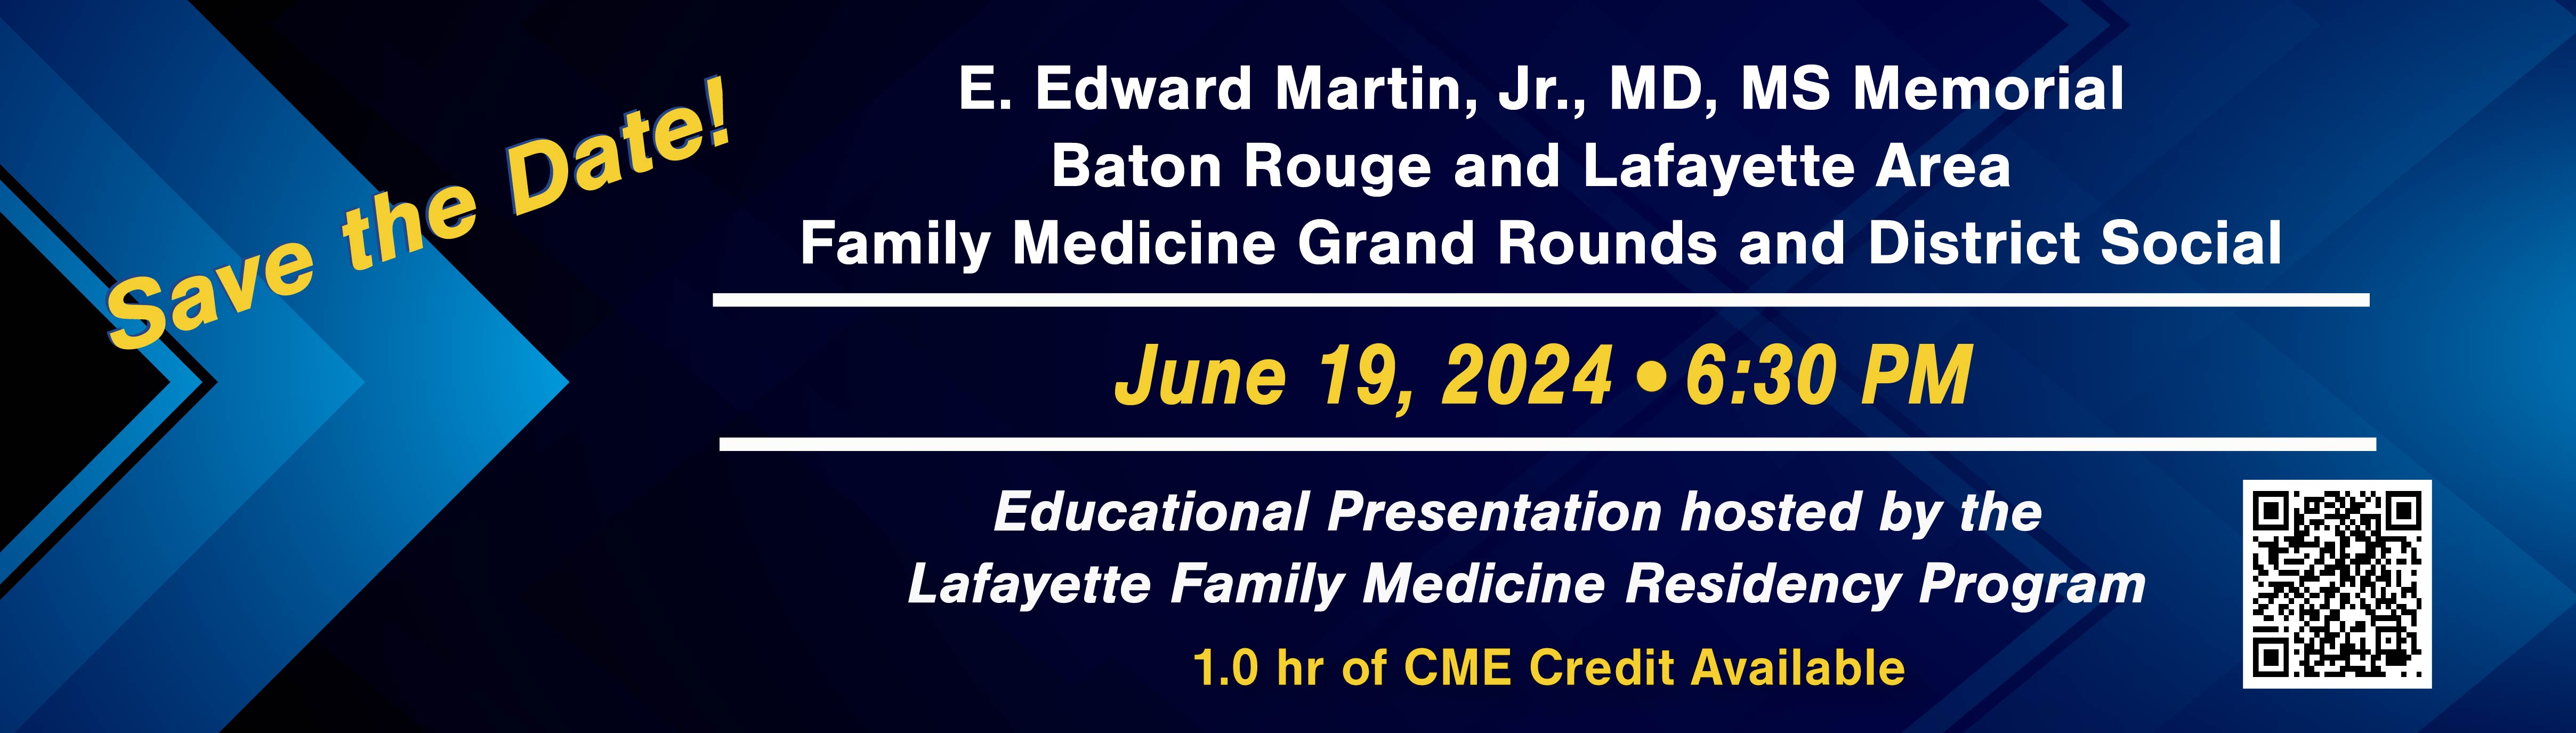 Grand Rounds web banner 01